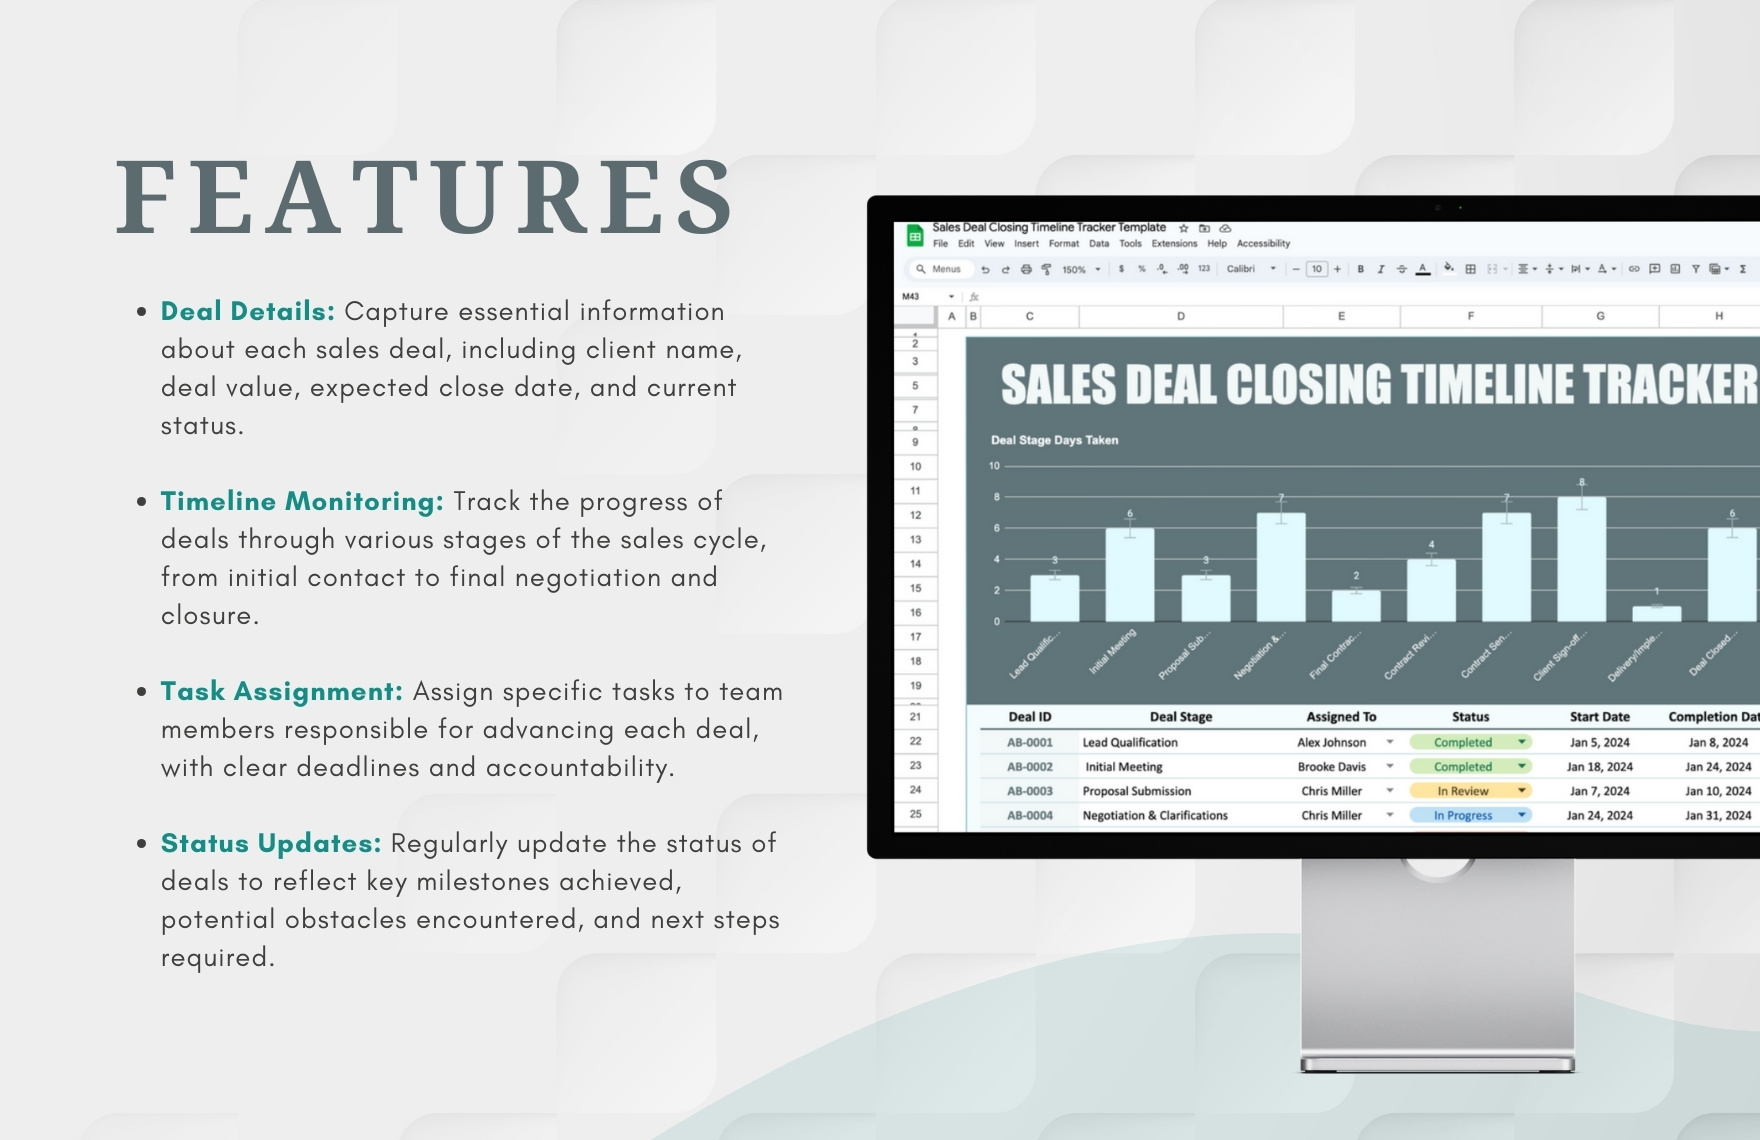 Sales Deal Closing Timeline Tracker Template